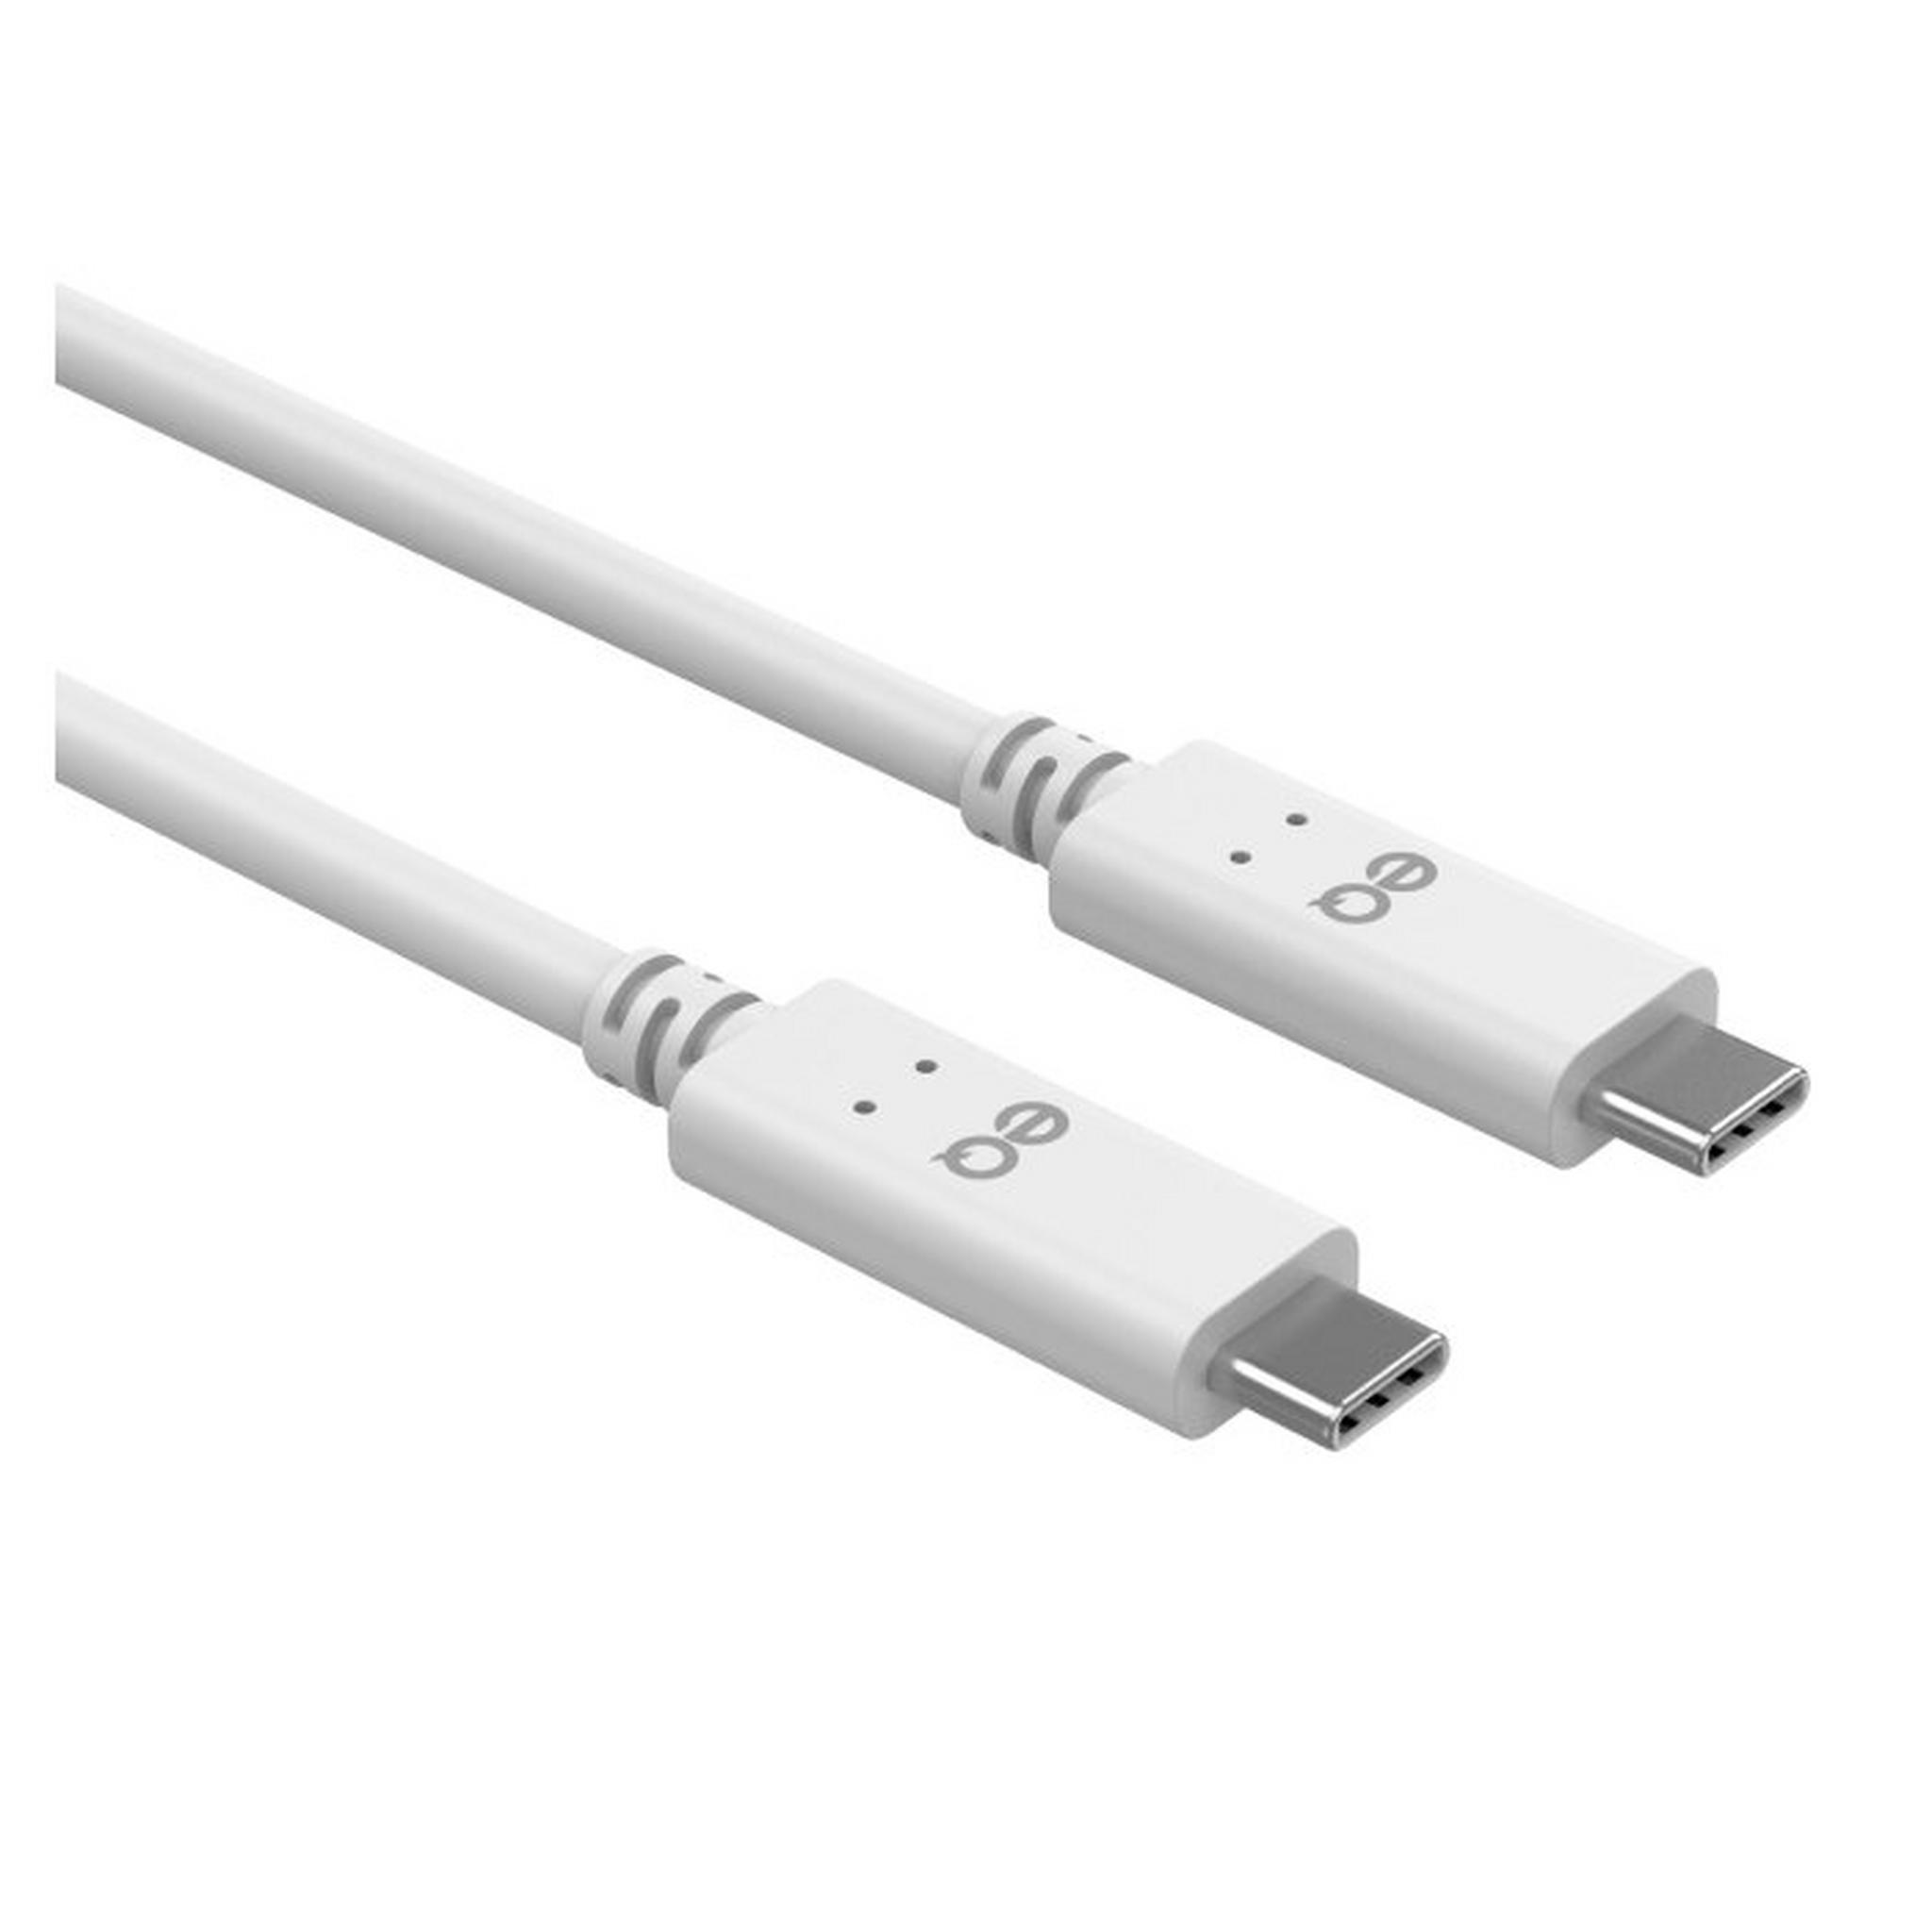 EQ Gen 1 Type-C to C 2M Cable - White